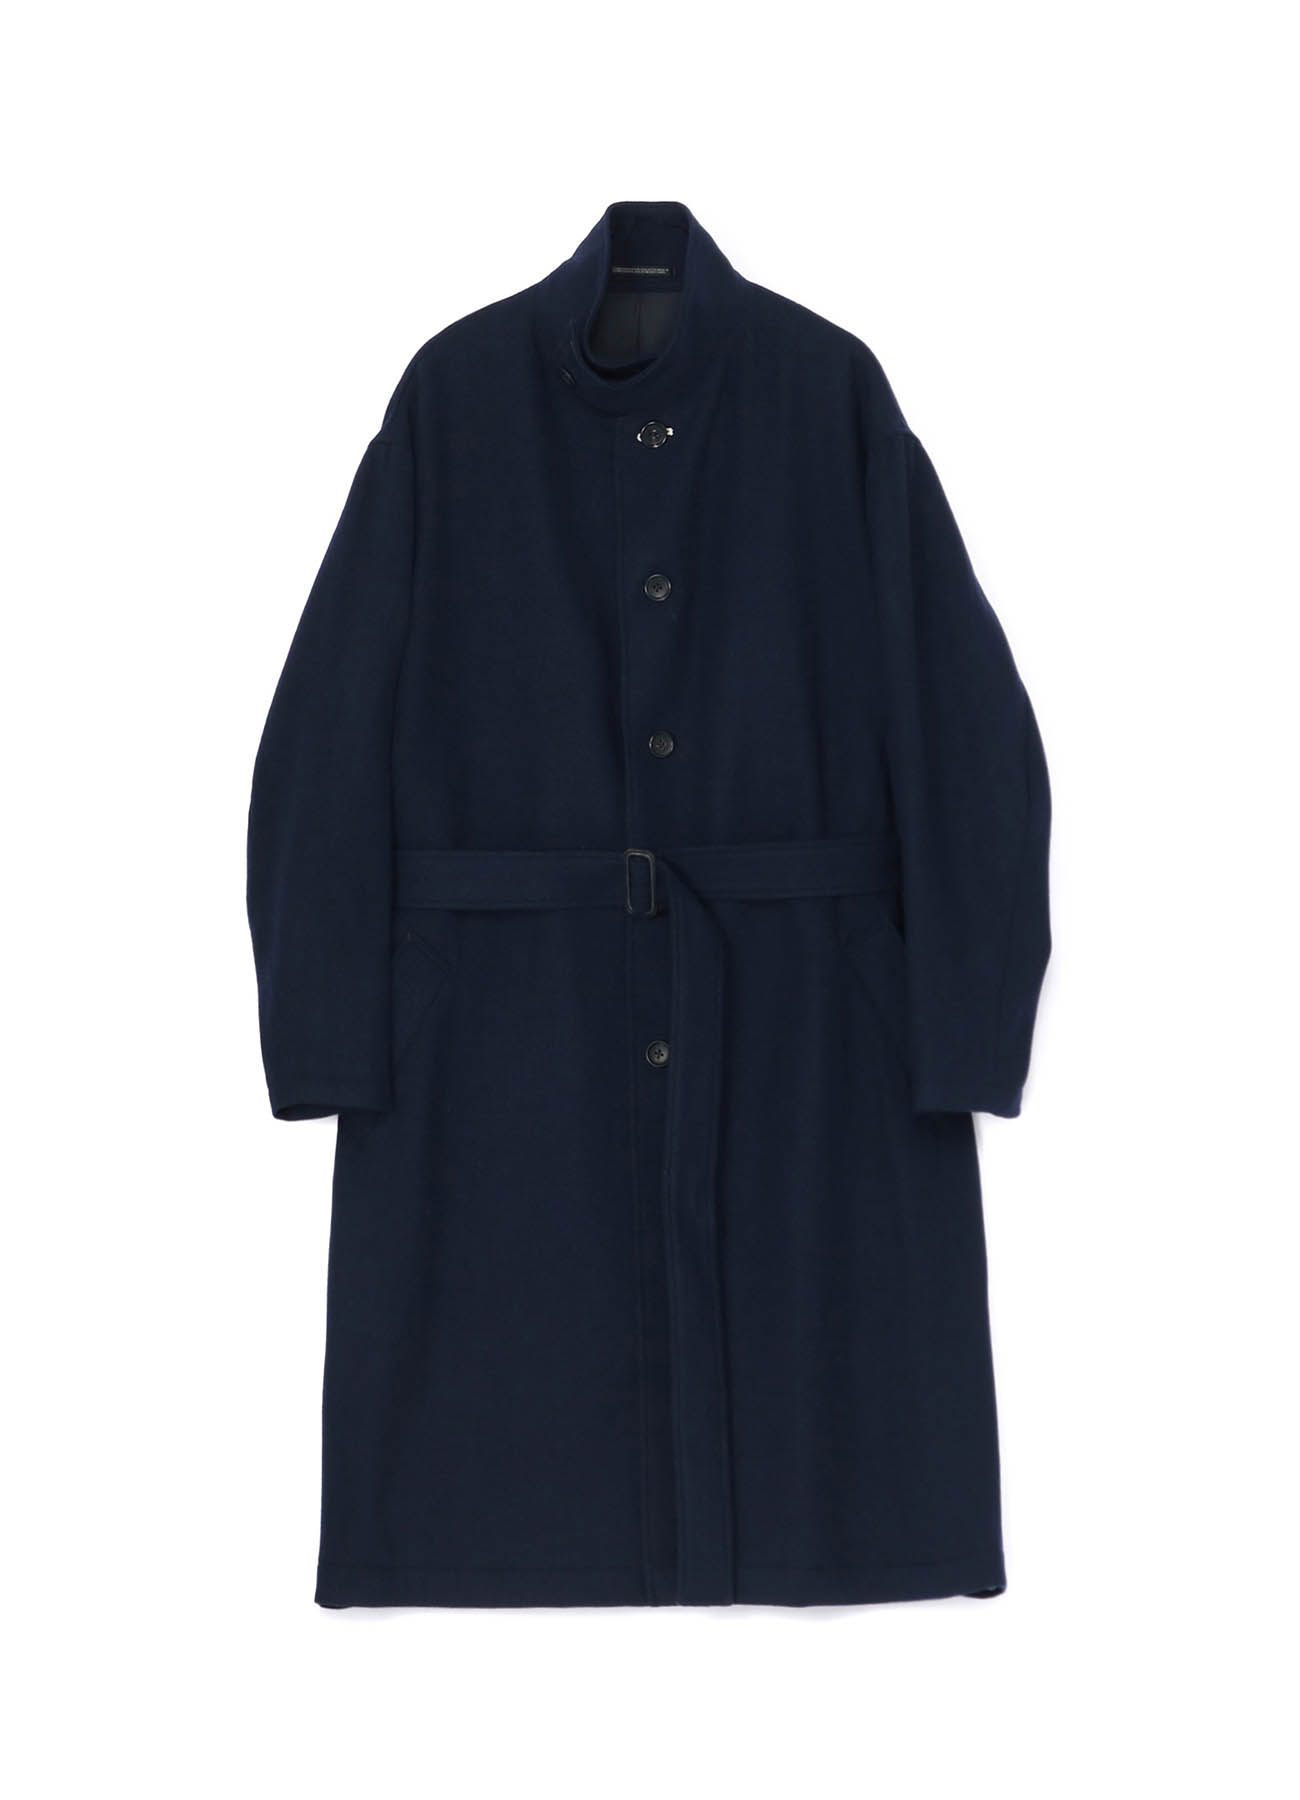 TWILL FLANNEL J-STAND UP COLLAR COAT